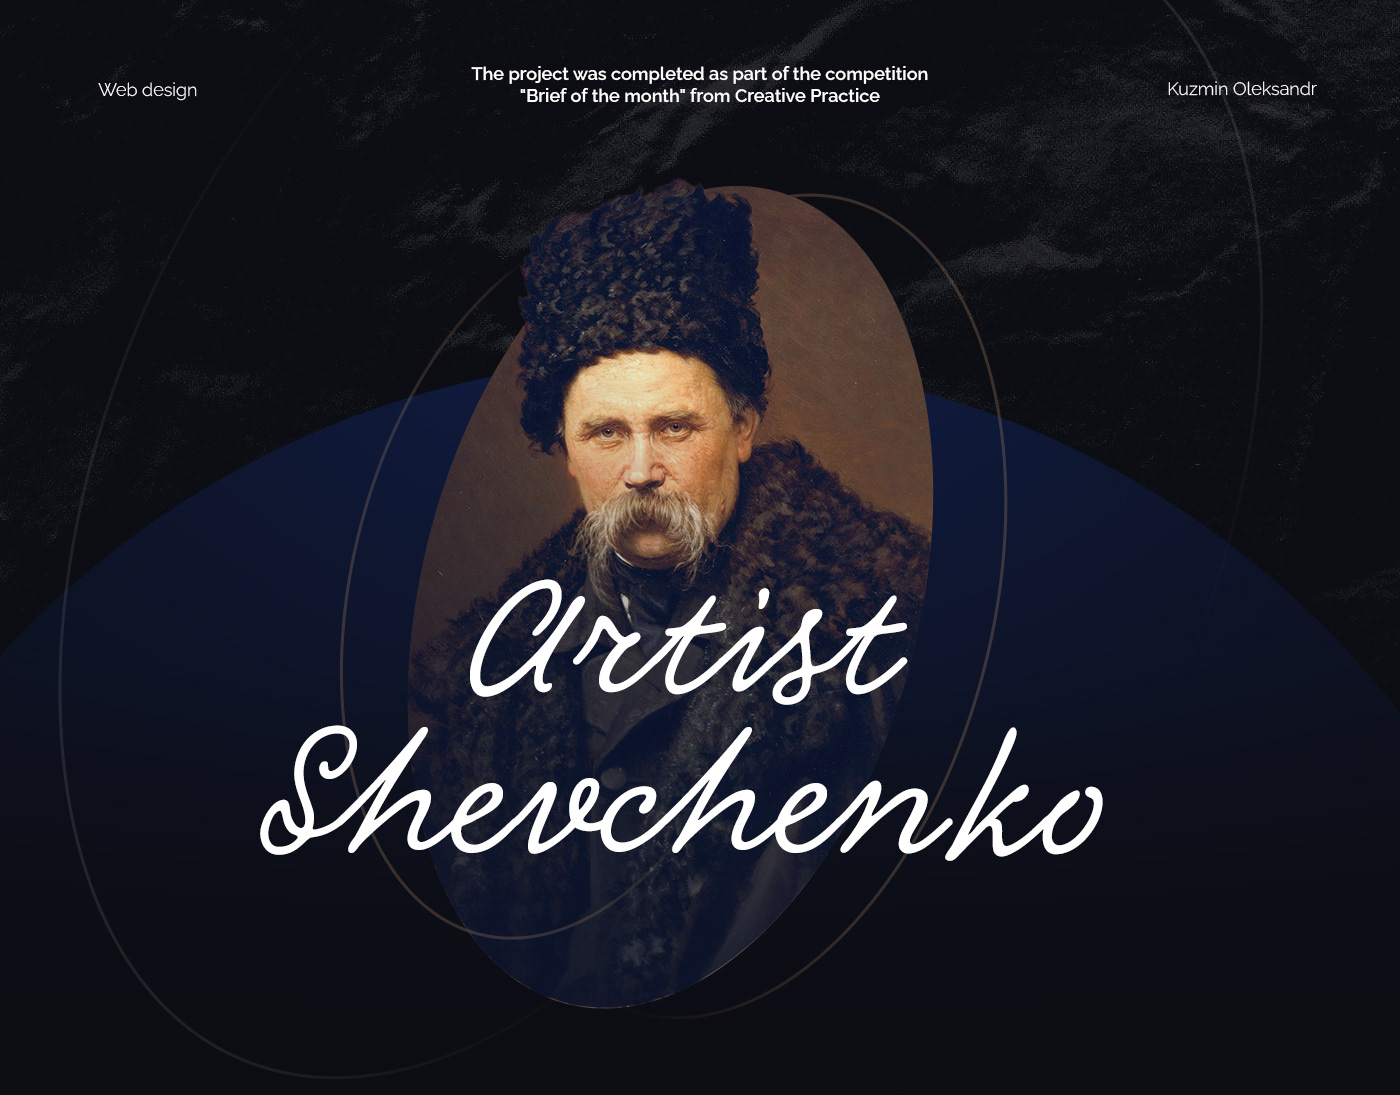 The title image of the project is "The Artist Shevchenko". A portrait of Shevchenko with his signatu